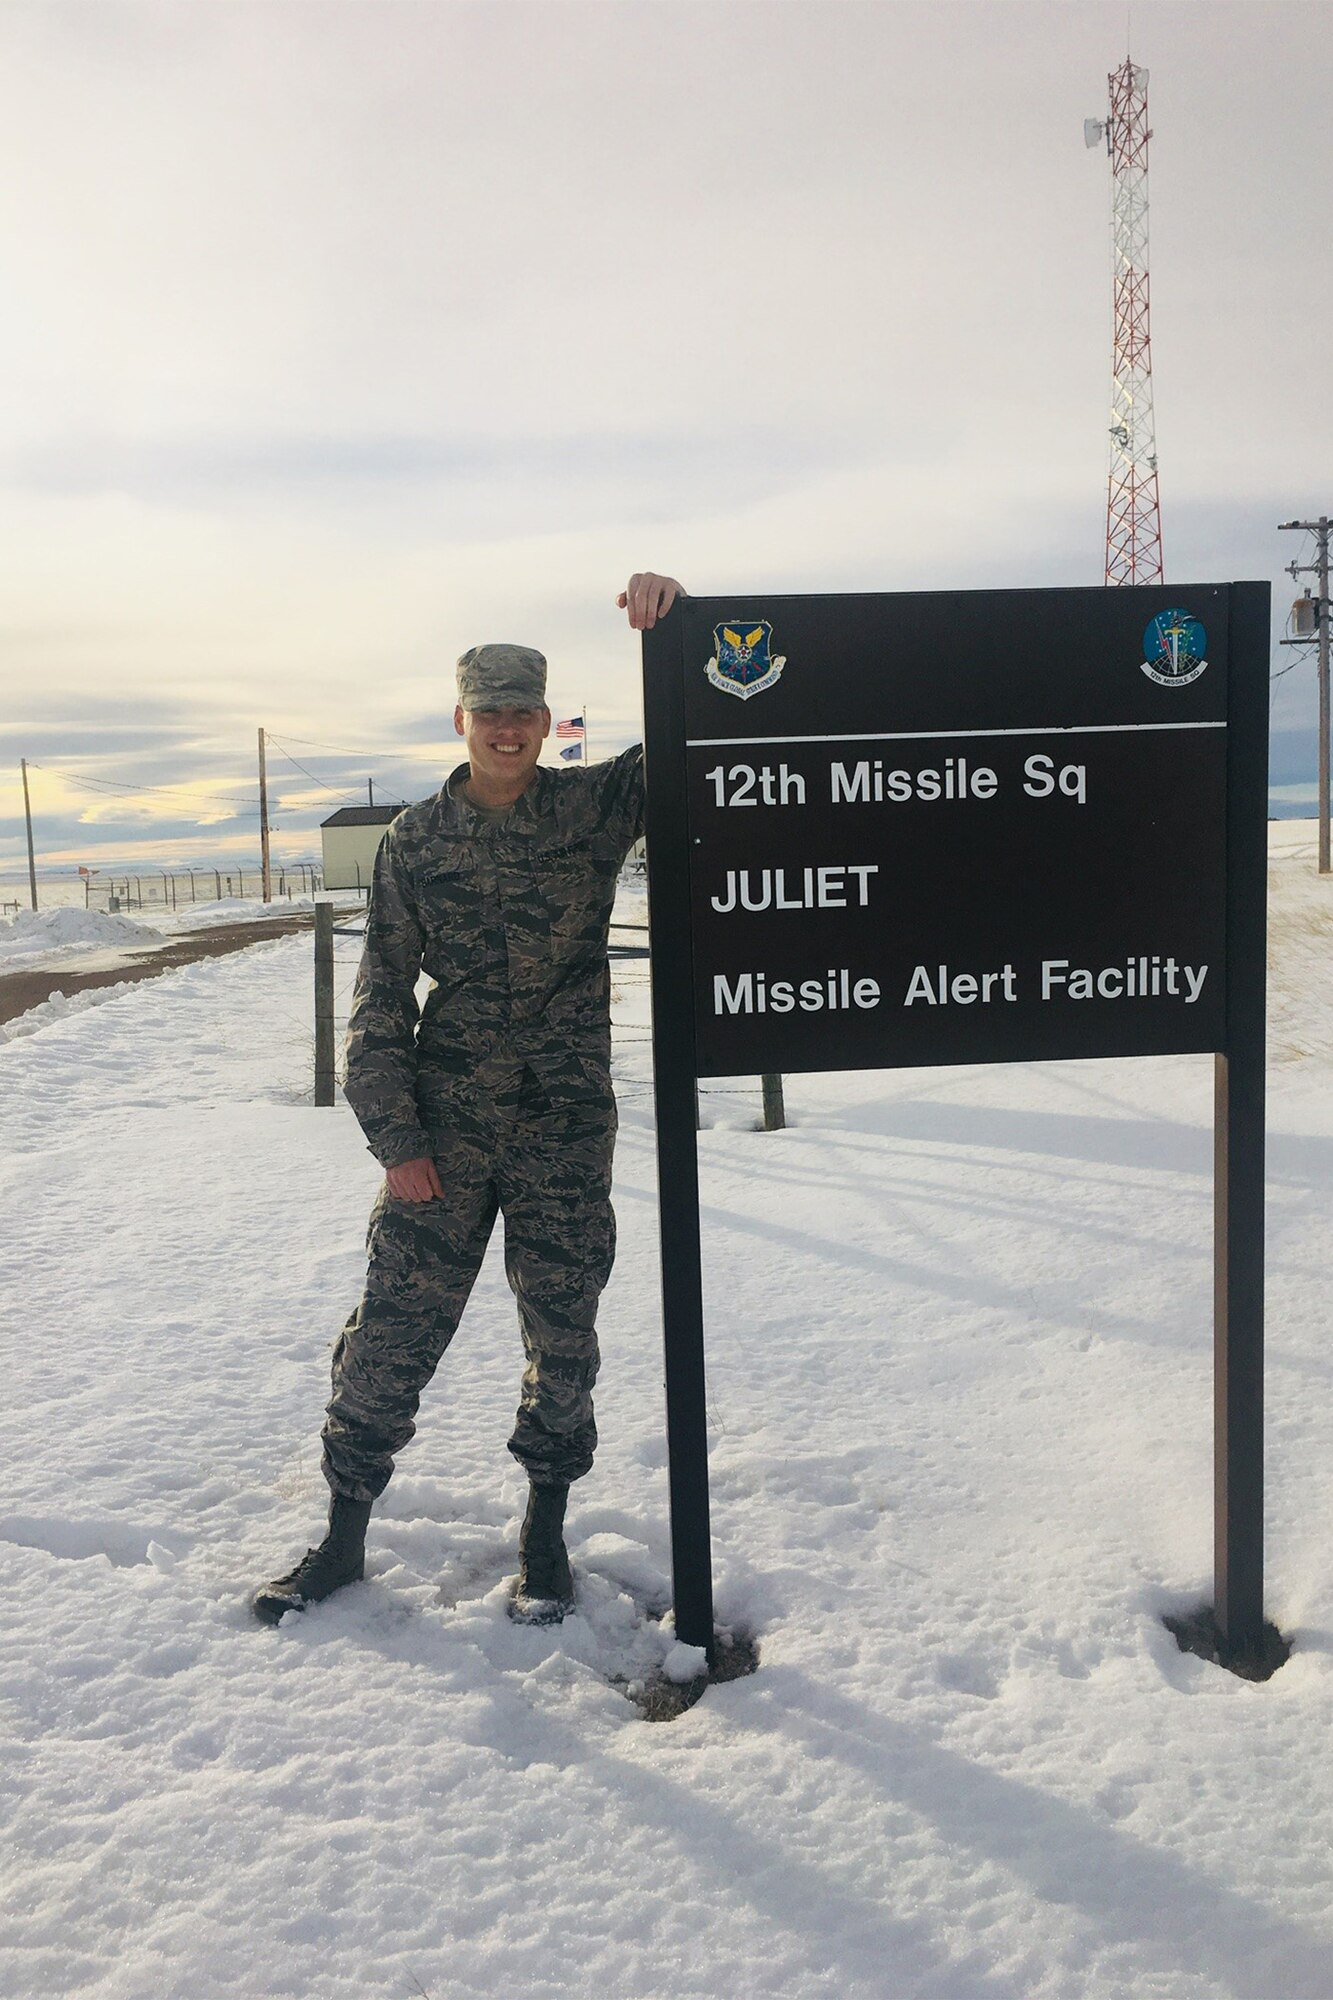 Then Staff Sgt. Clay Barnard, formerly a 12th Missile Squadron missile alert facility manager, poses for a picture by a sign at Juliet missile alert facility near Malmstrom Air Force Base, Mont.